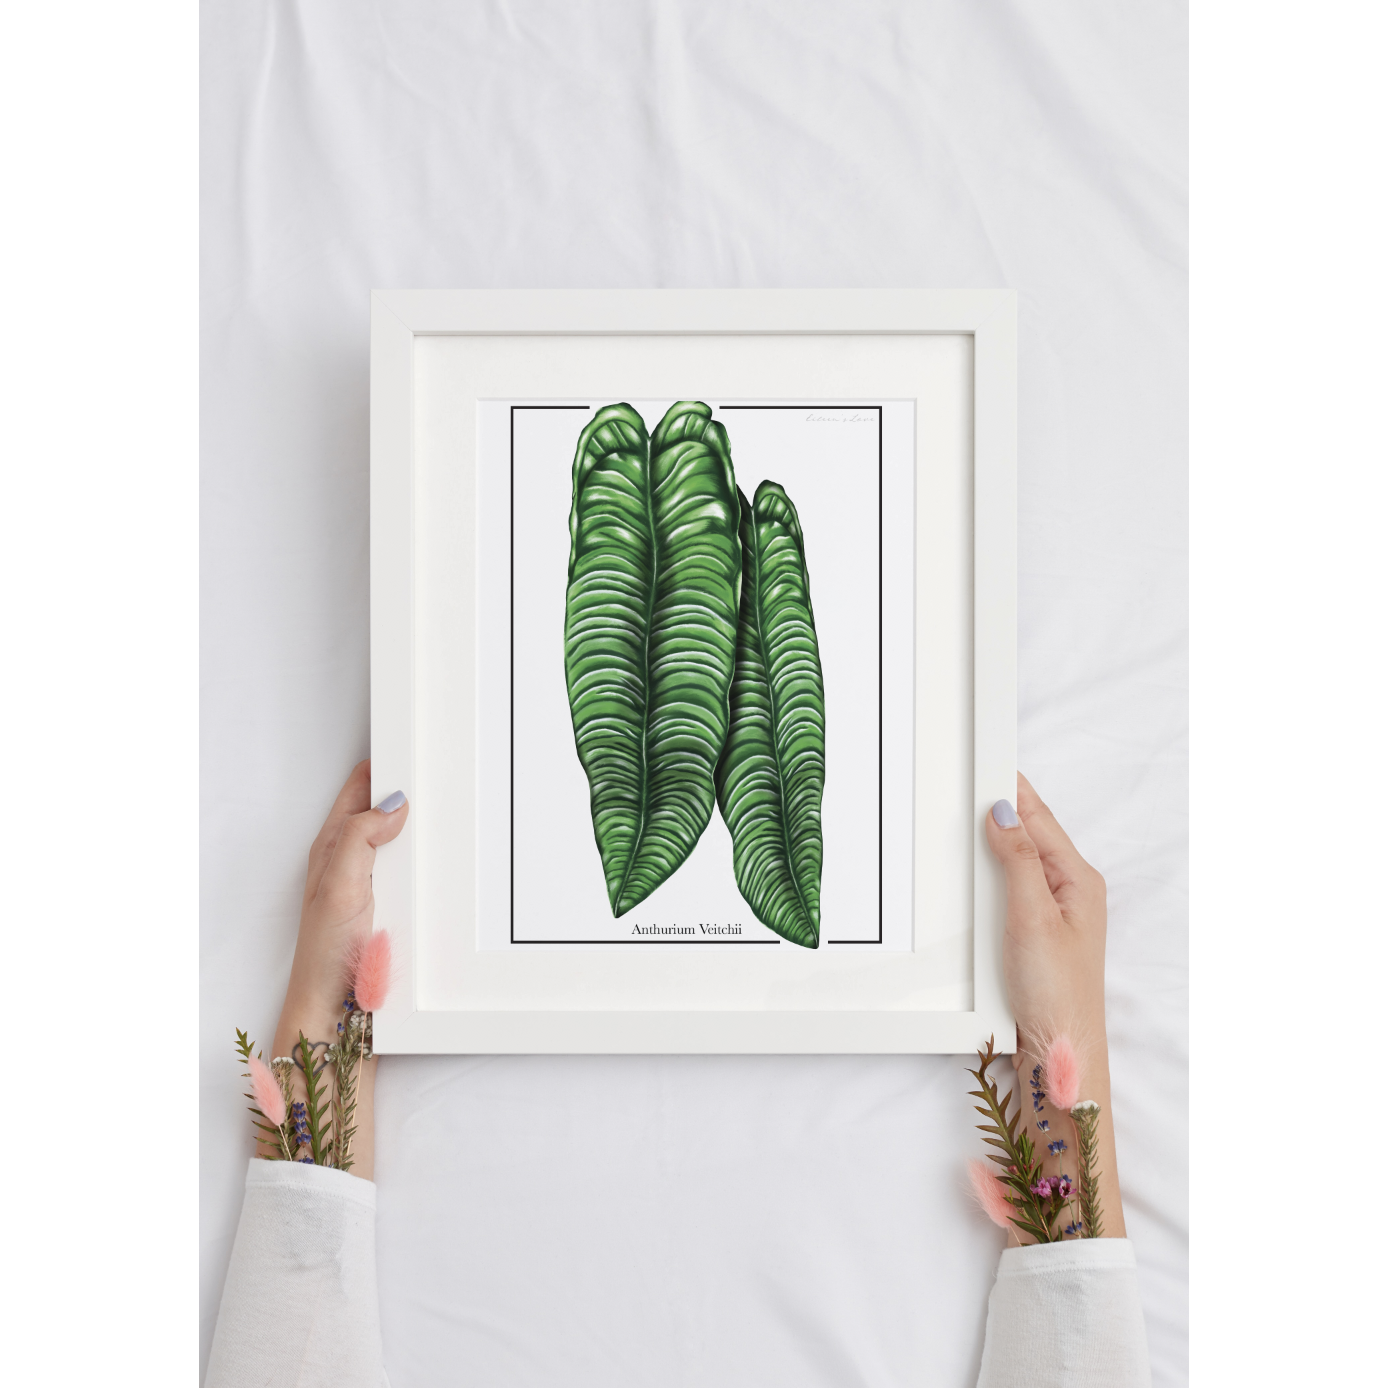 Anthurium Veitchii framed artwork being held by hands with flowers coming out from shirt sleeve